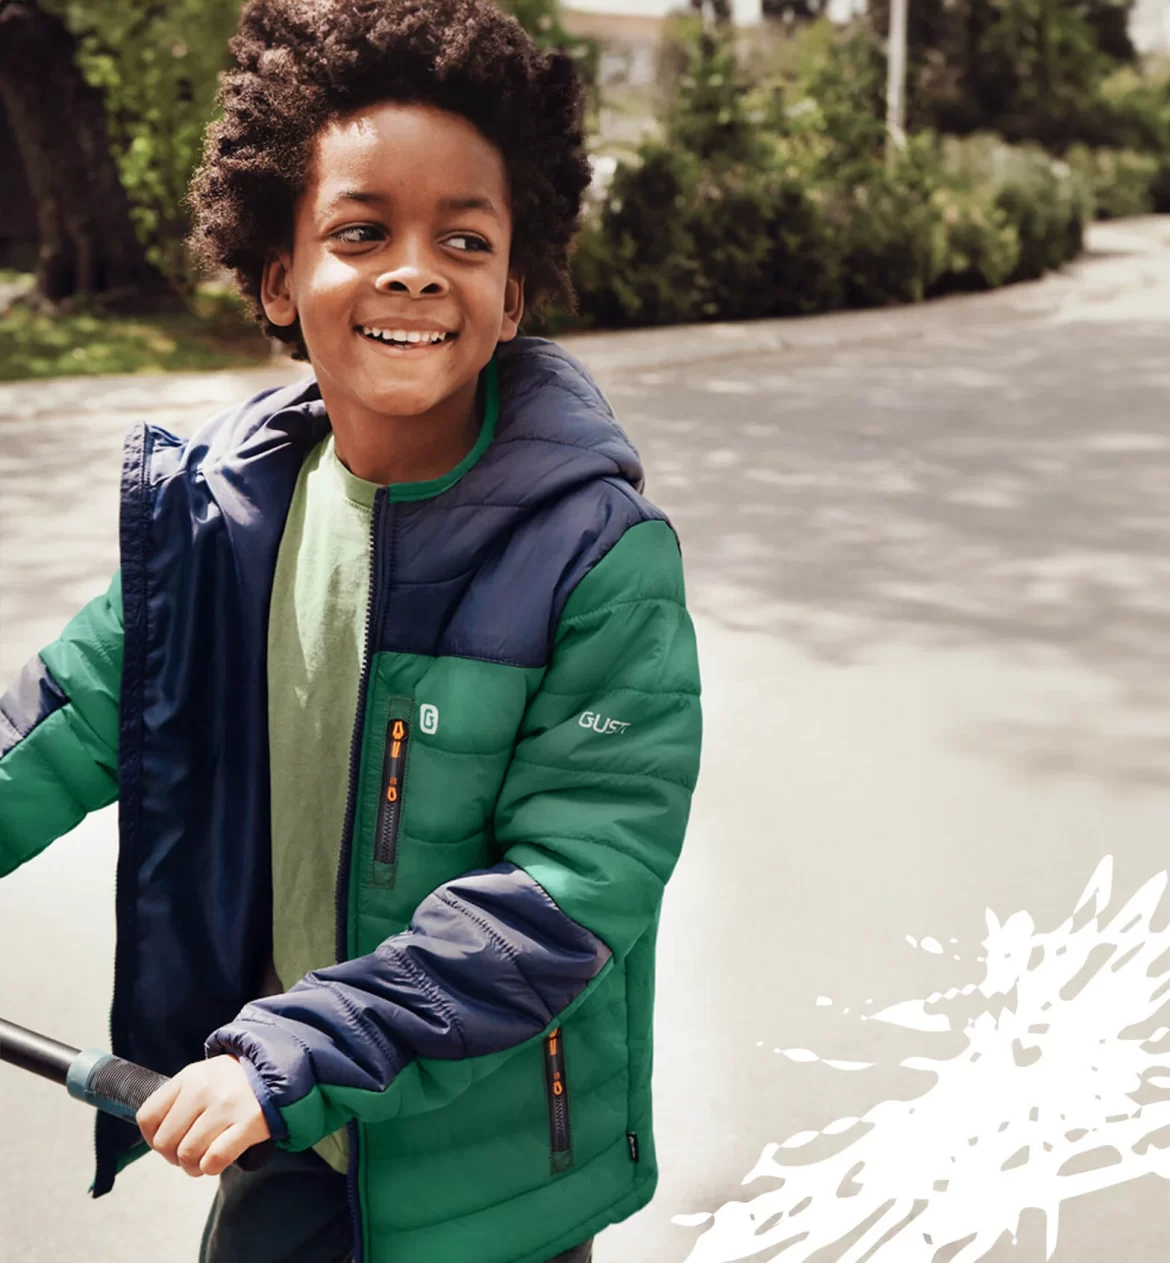 “Stylish Safeguard: The Importance of Quality in Kids’ Outerwear”